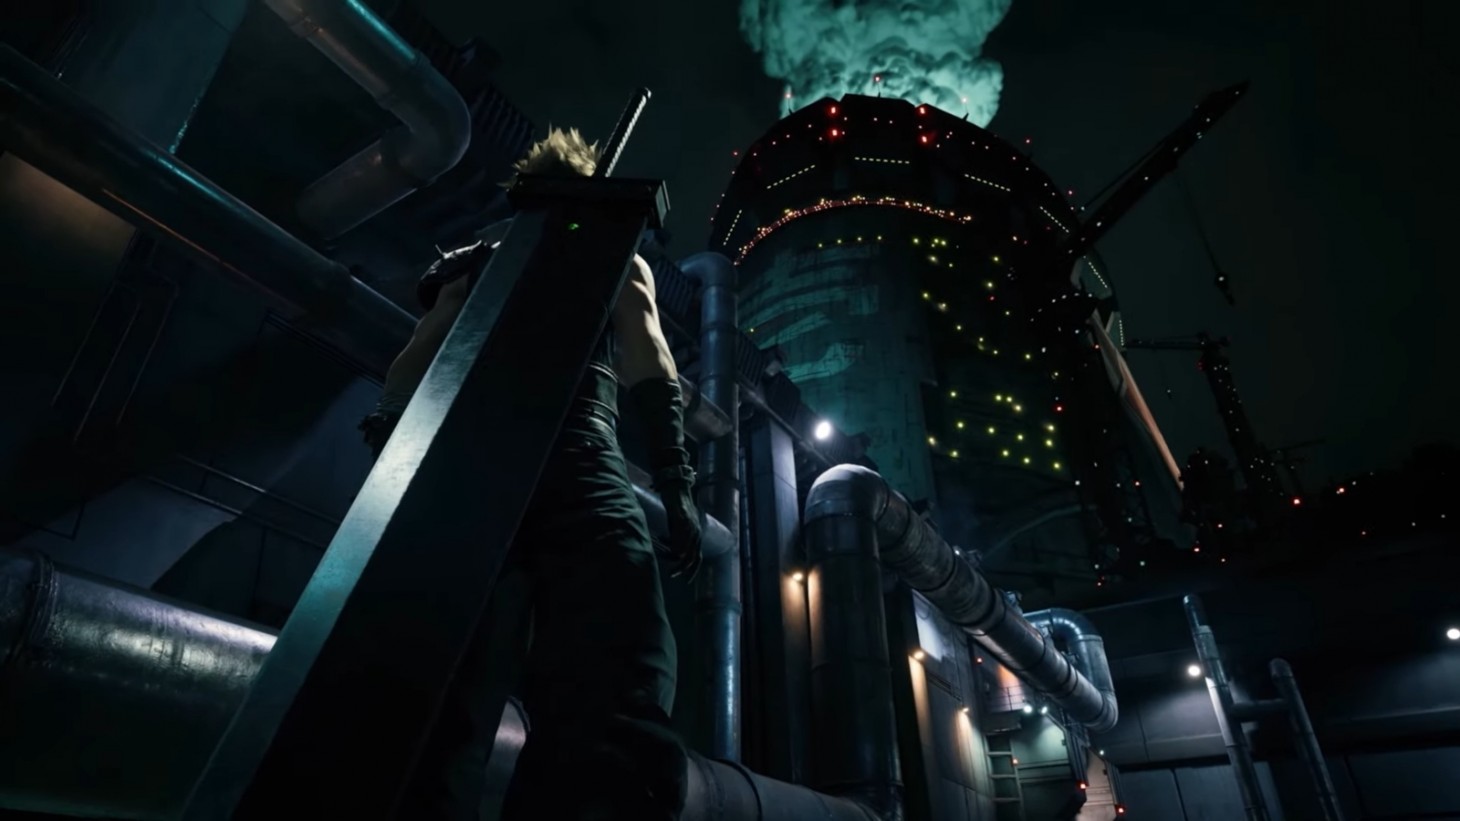 Final Fantasy VII Rebirth expands upon what made Remake great